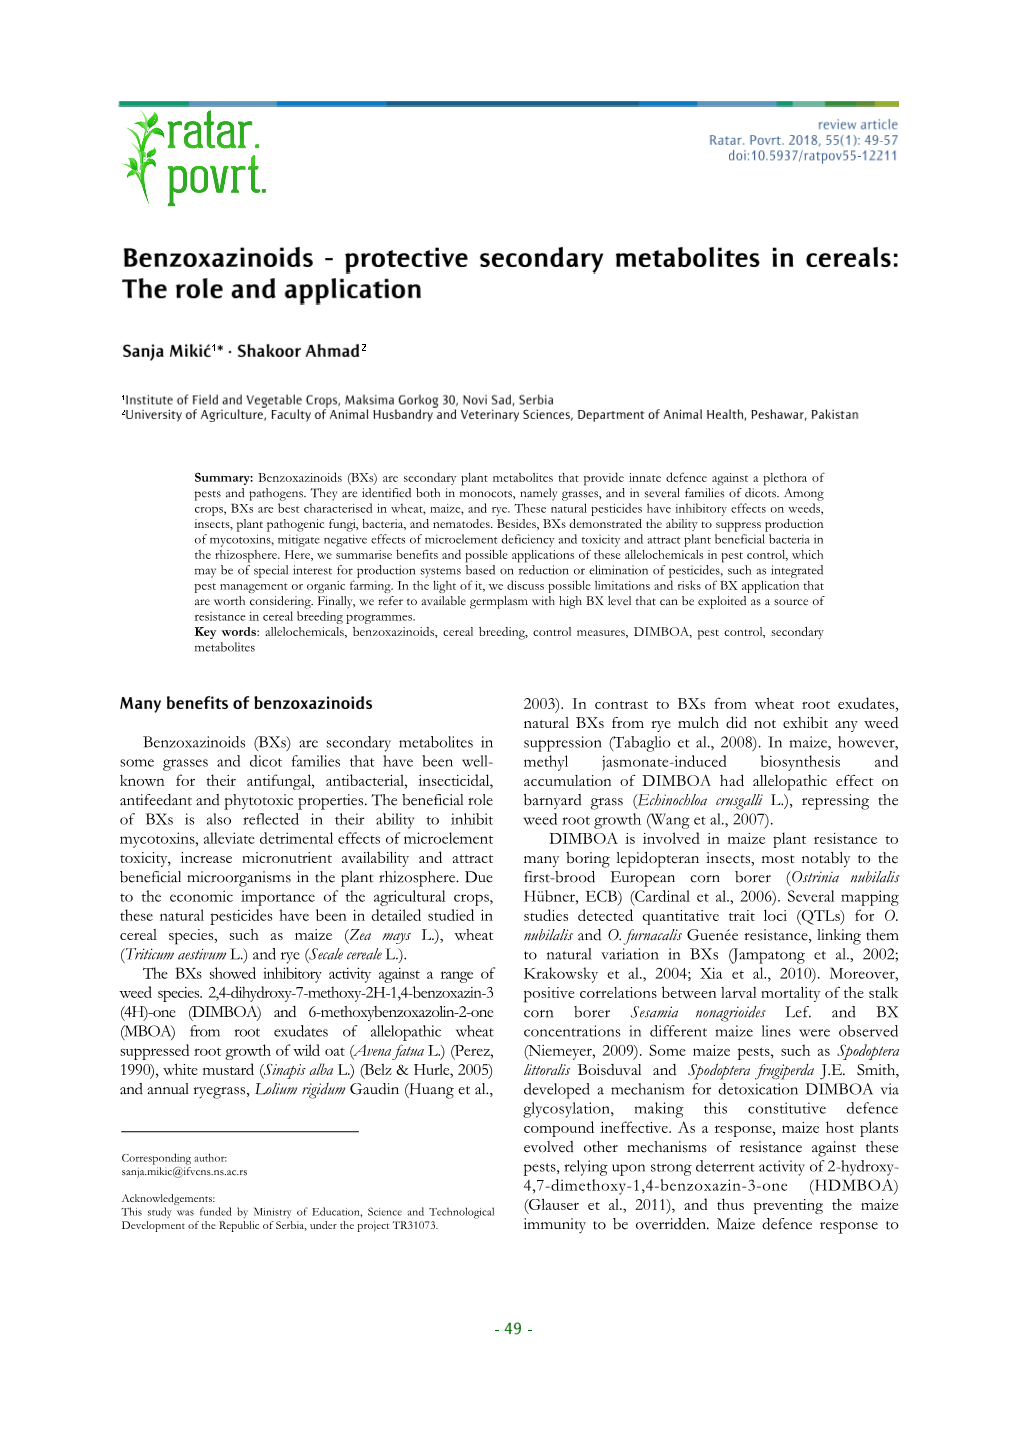 Benzoxazinoids (Bxs) Are Secondary Metabolites in Some Grasses And